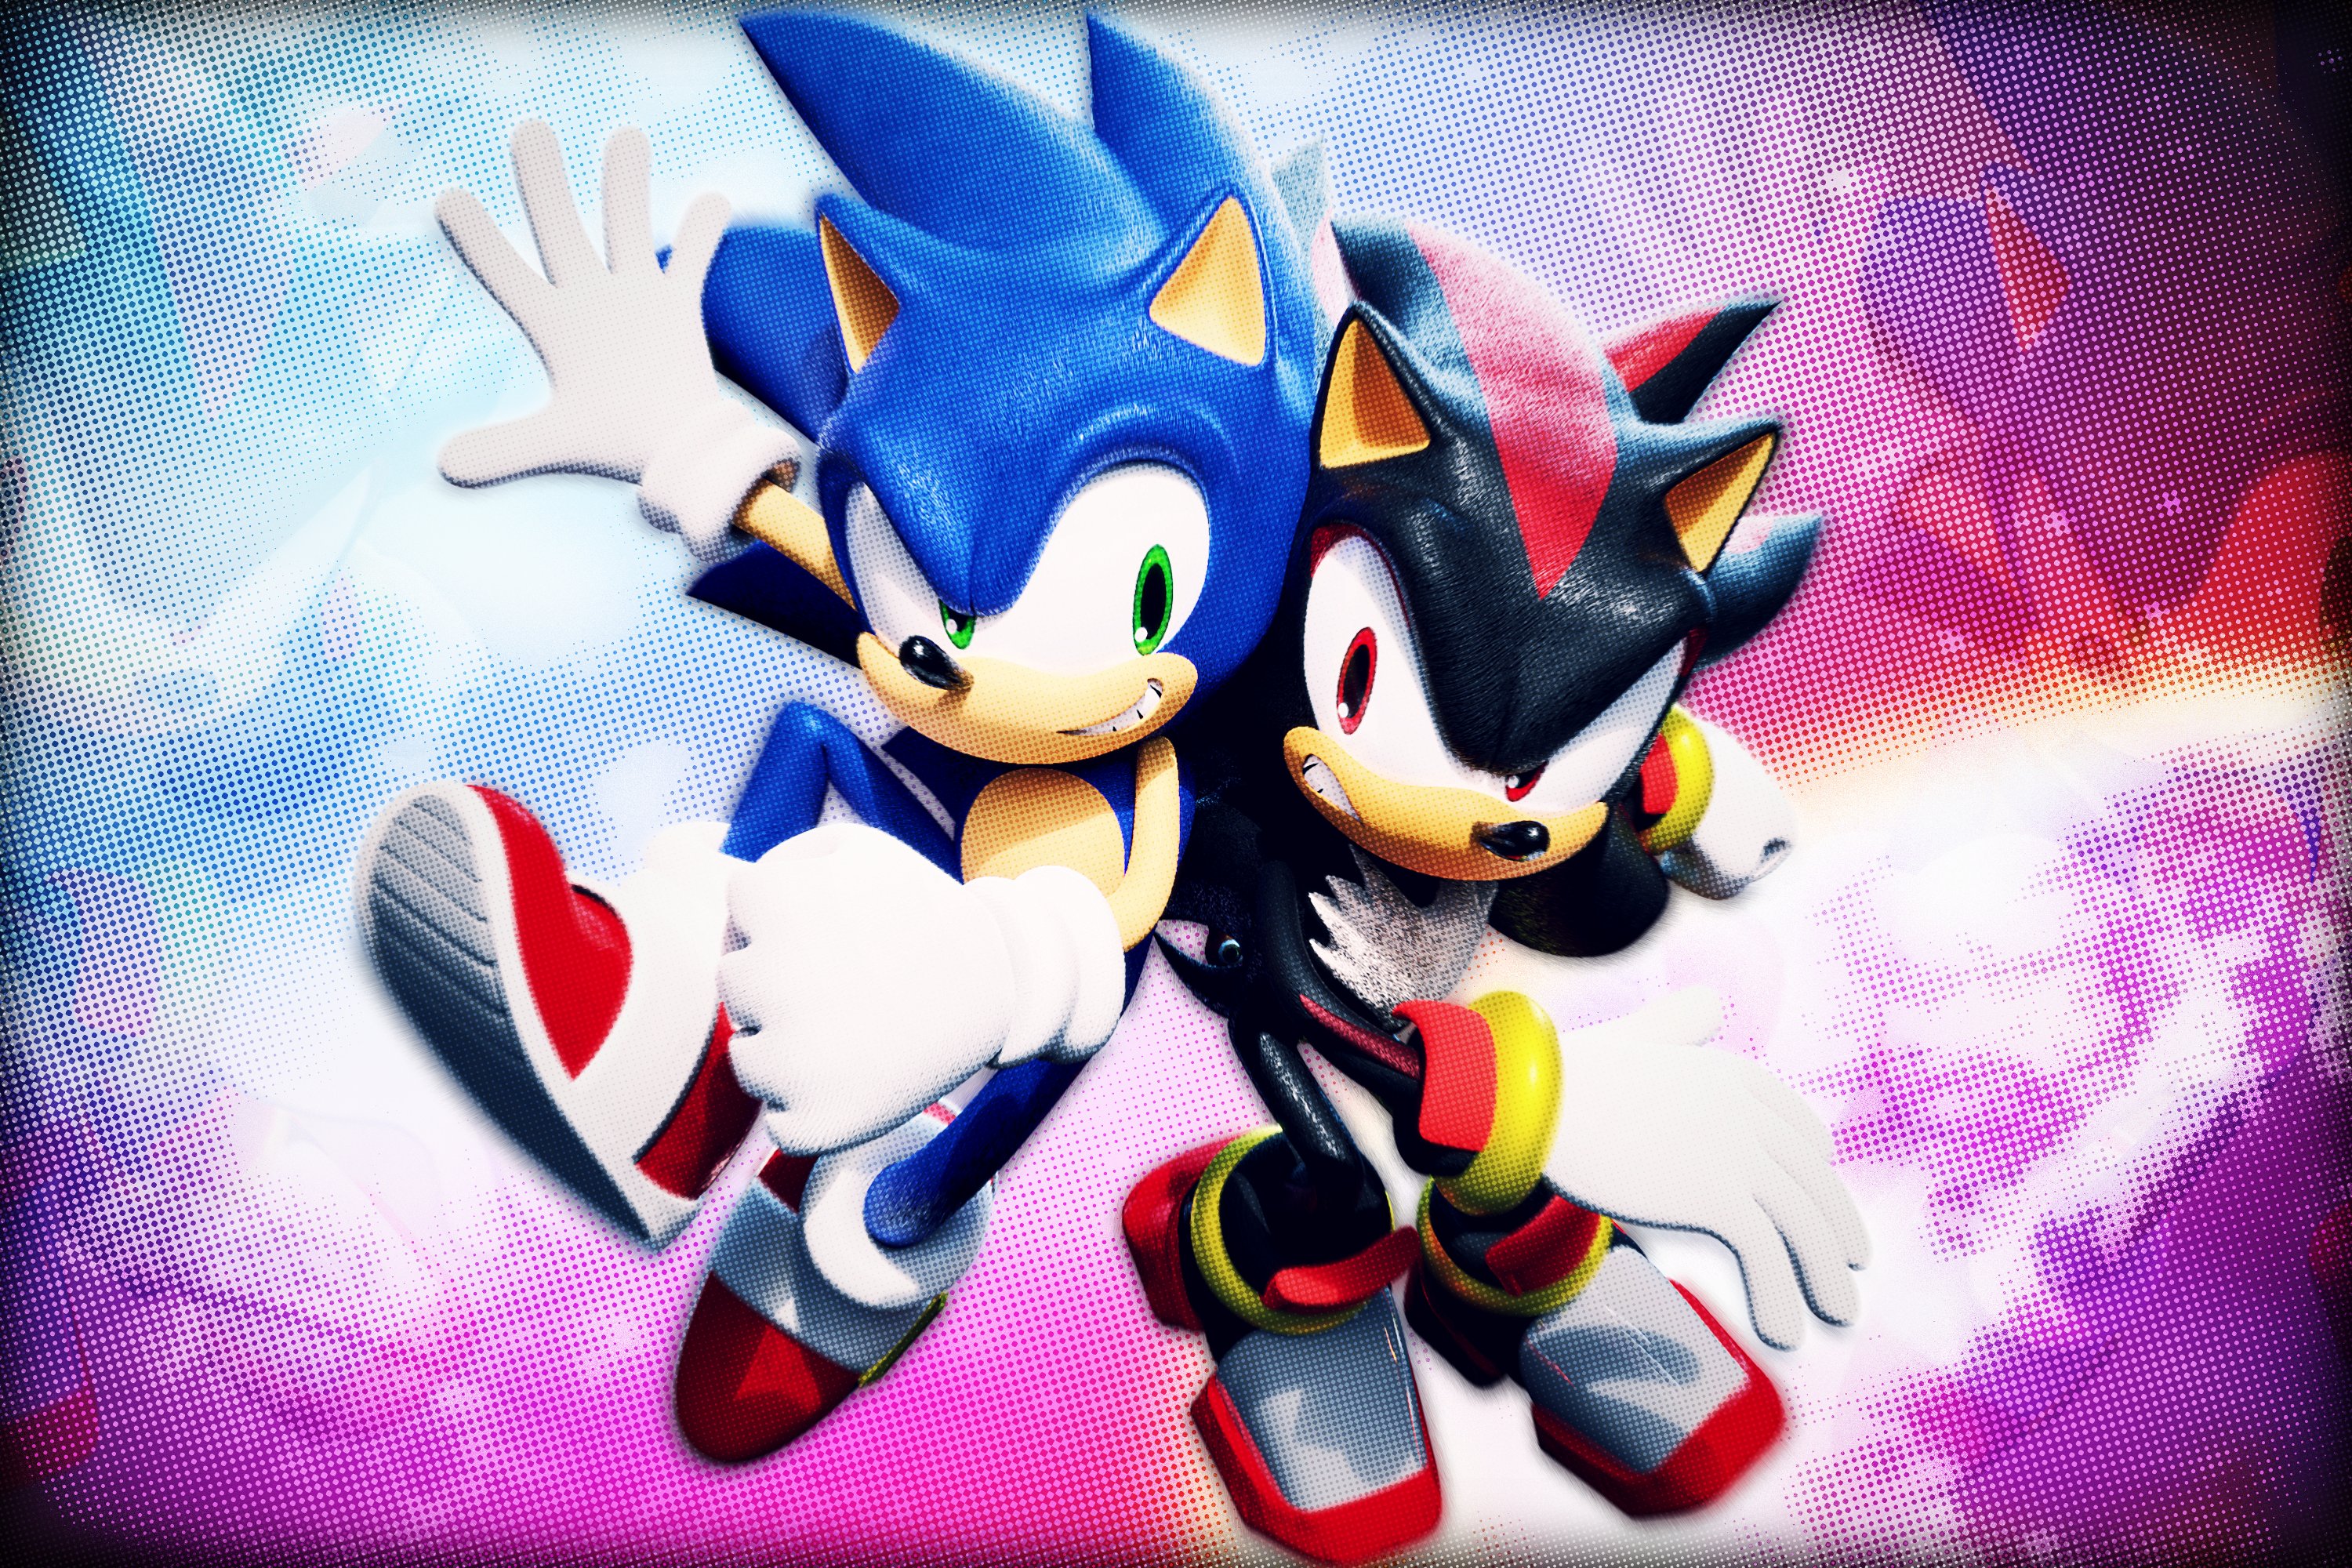 X 上的🌟🎄❄️Jay - aRtz❄️🎄🌟：「Sonic movie-versary was days ago. I made this  cool art based on the ending of Sonic Advance 3 but with the movie style  Advance Crew. #SonicMovie #SonicAdvance3 #SonicTheHedgehog